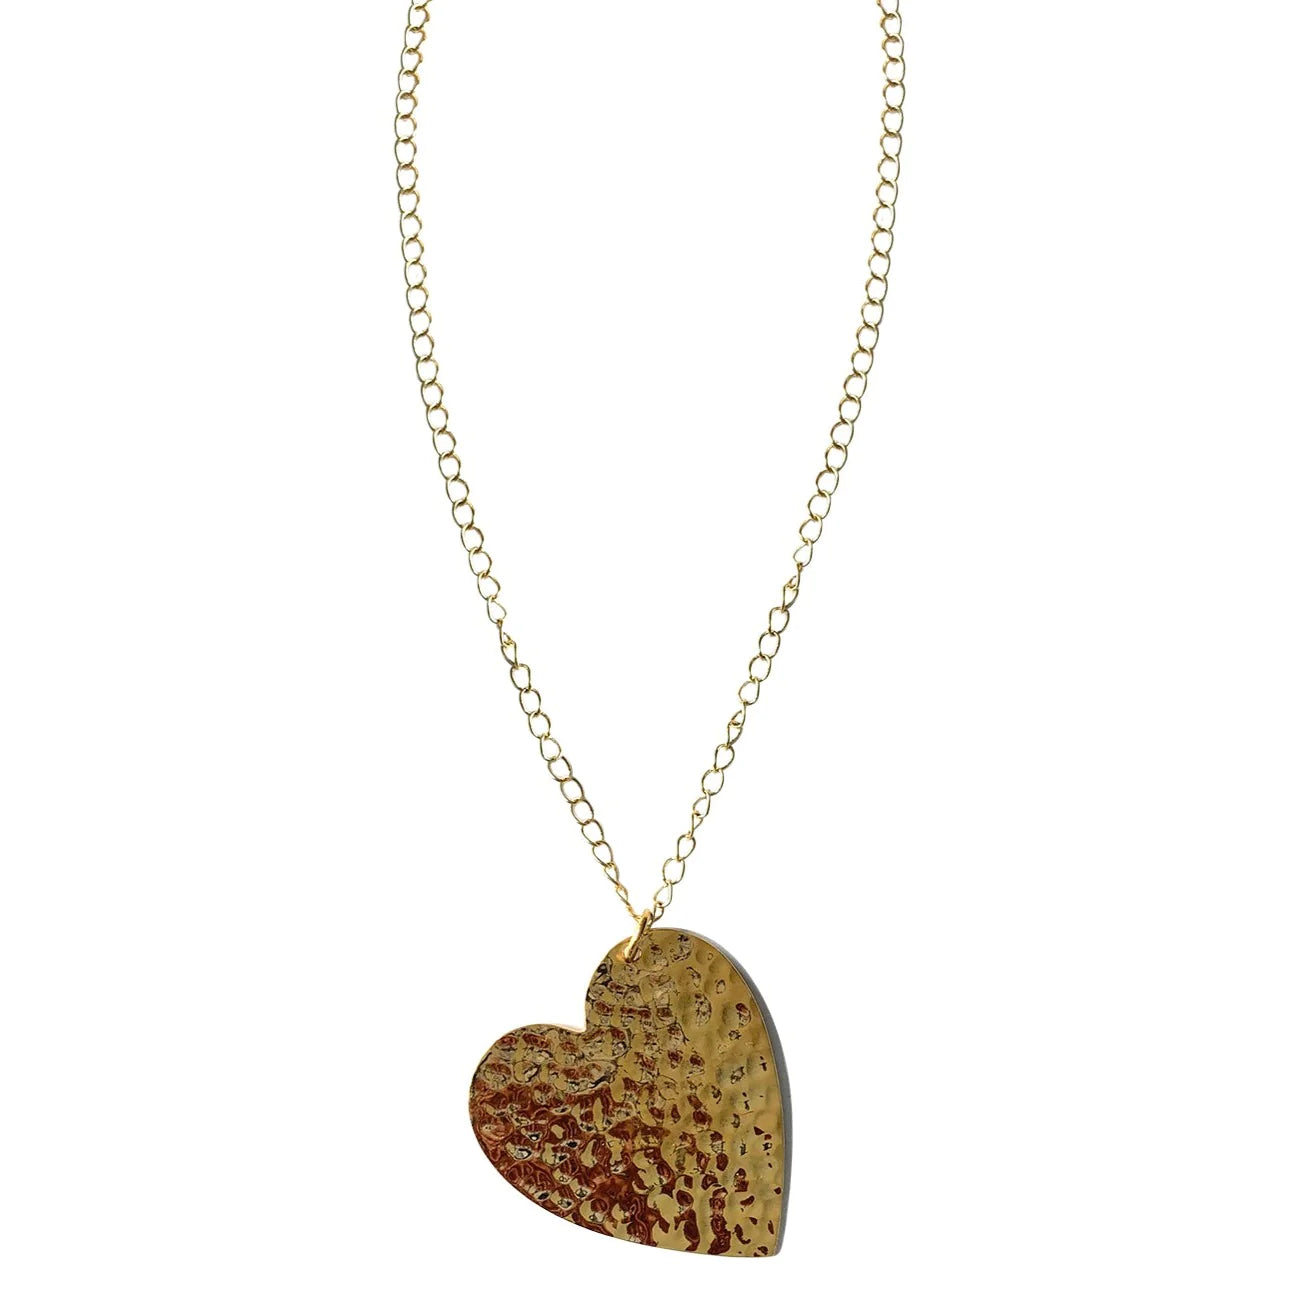 Necklace Sweetheart NS Gold